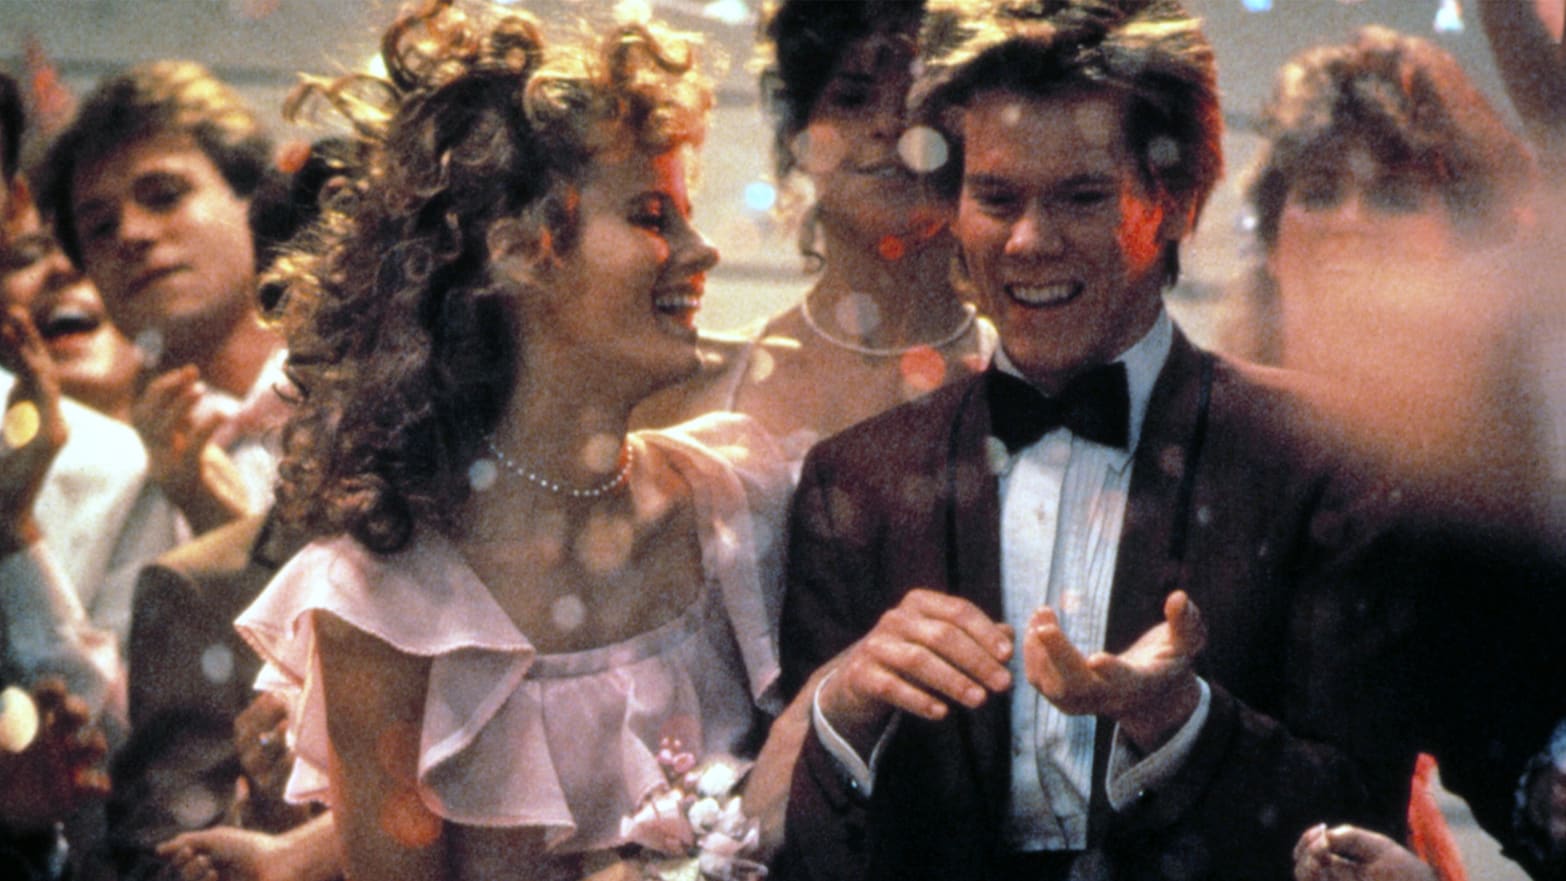 Lori Singer and Kevin Bacon in 'Footloose'